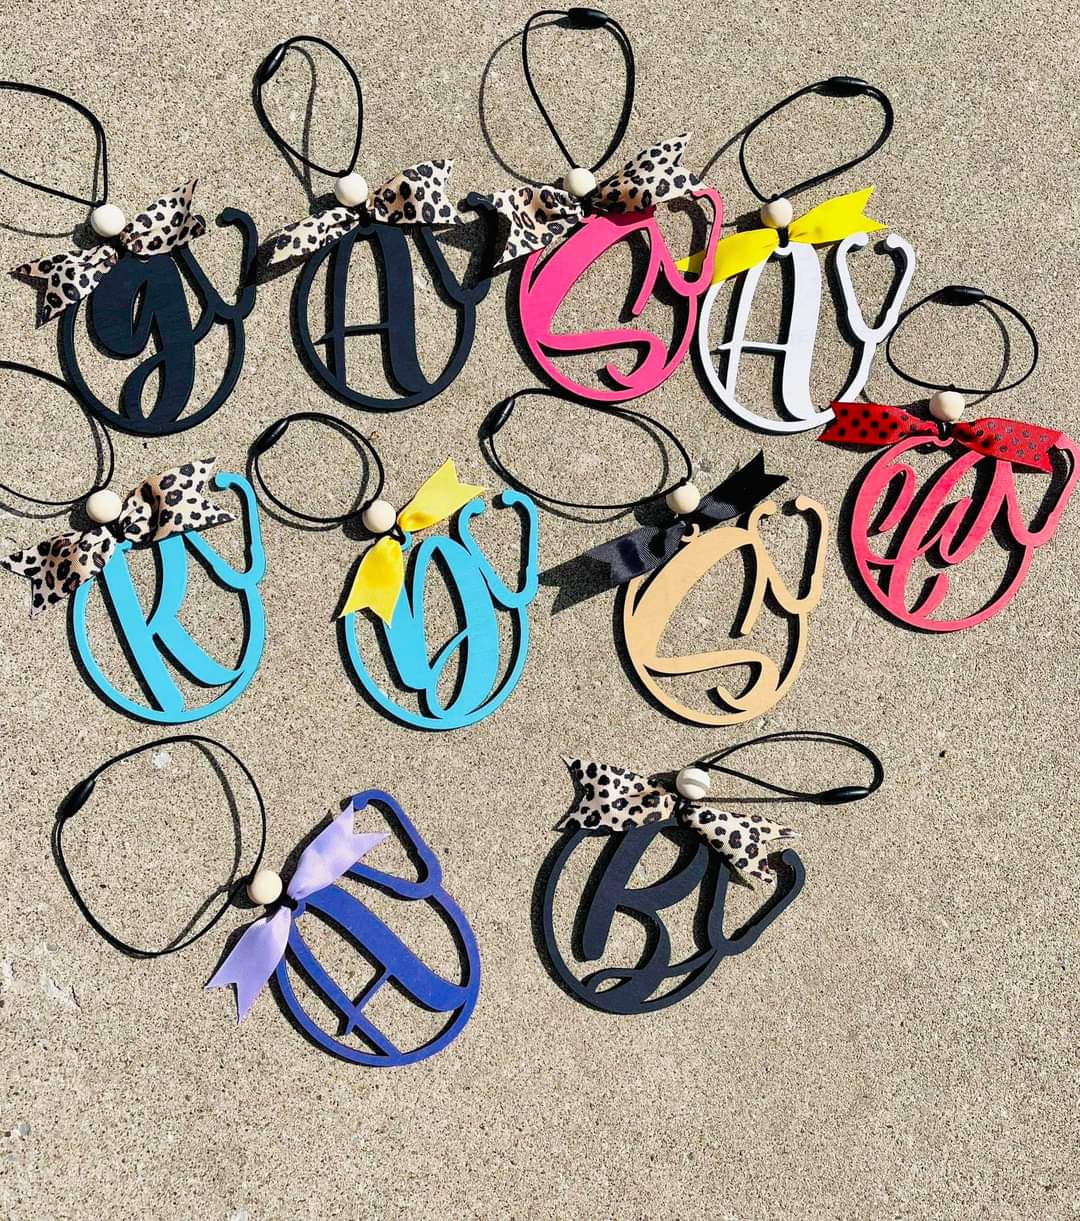 Stethoscope initial car charms